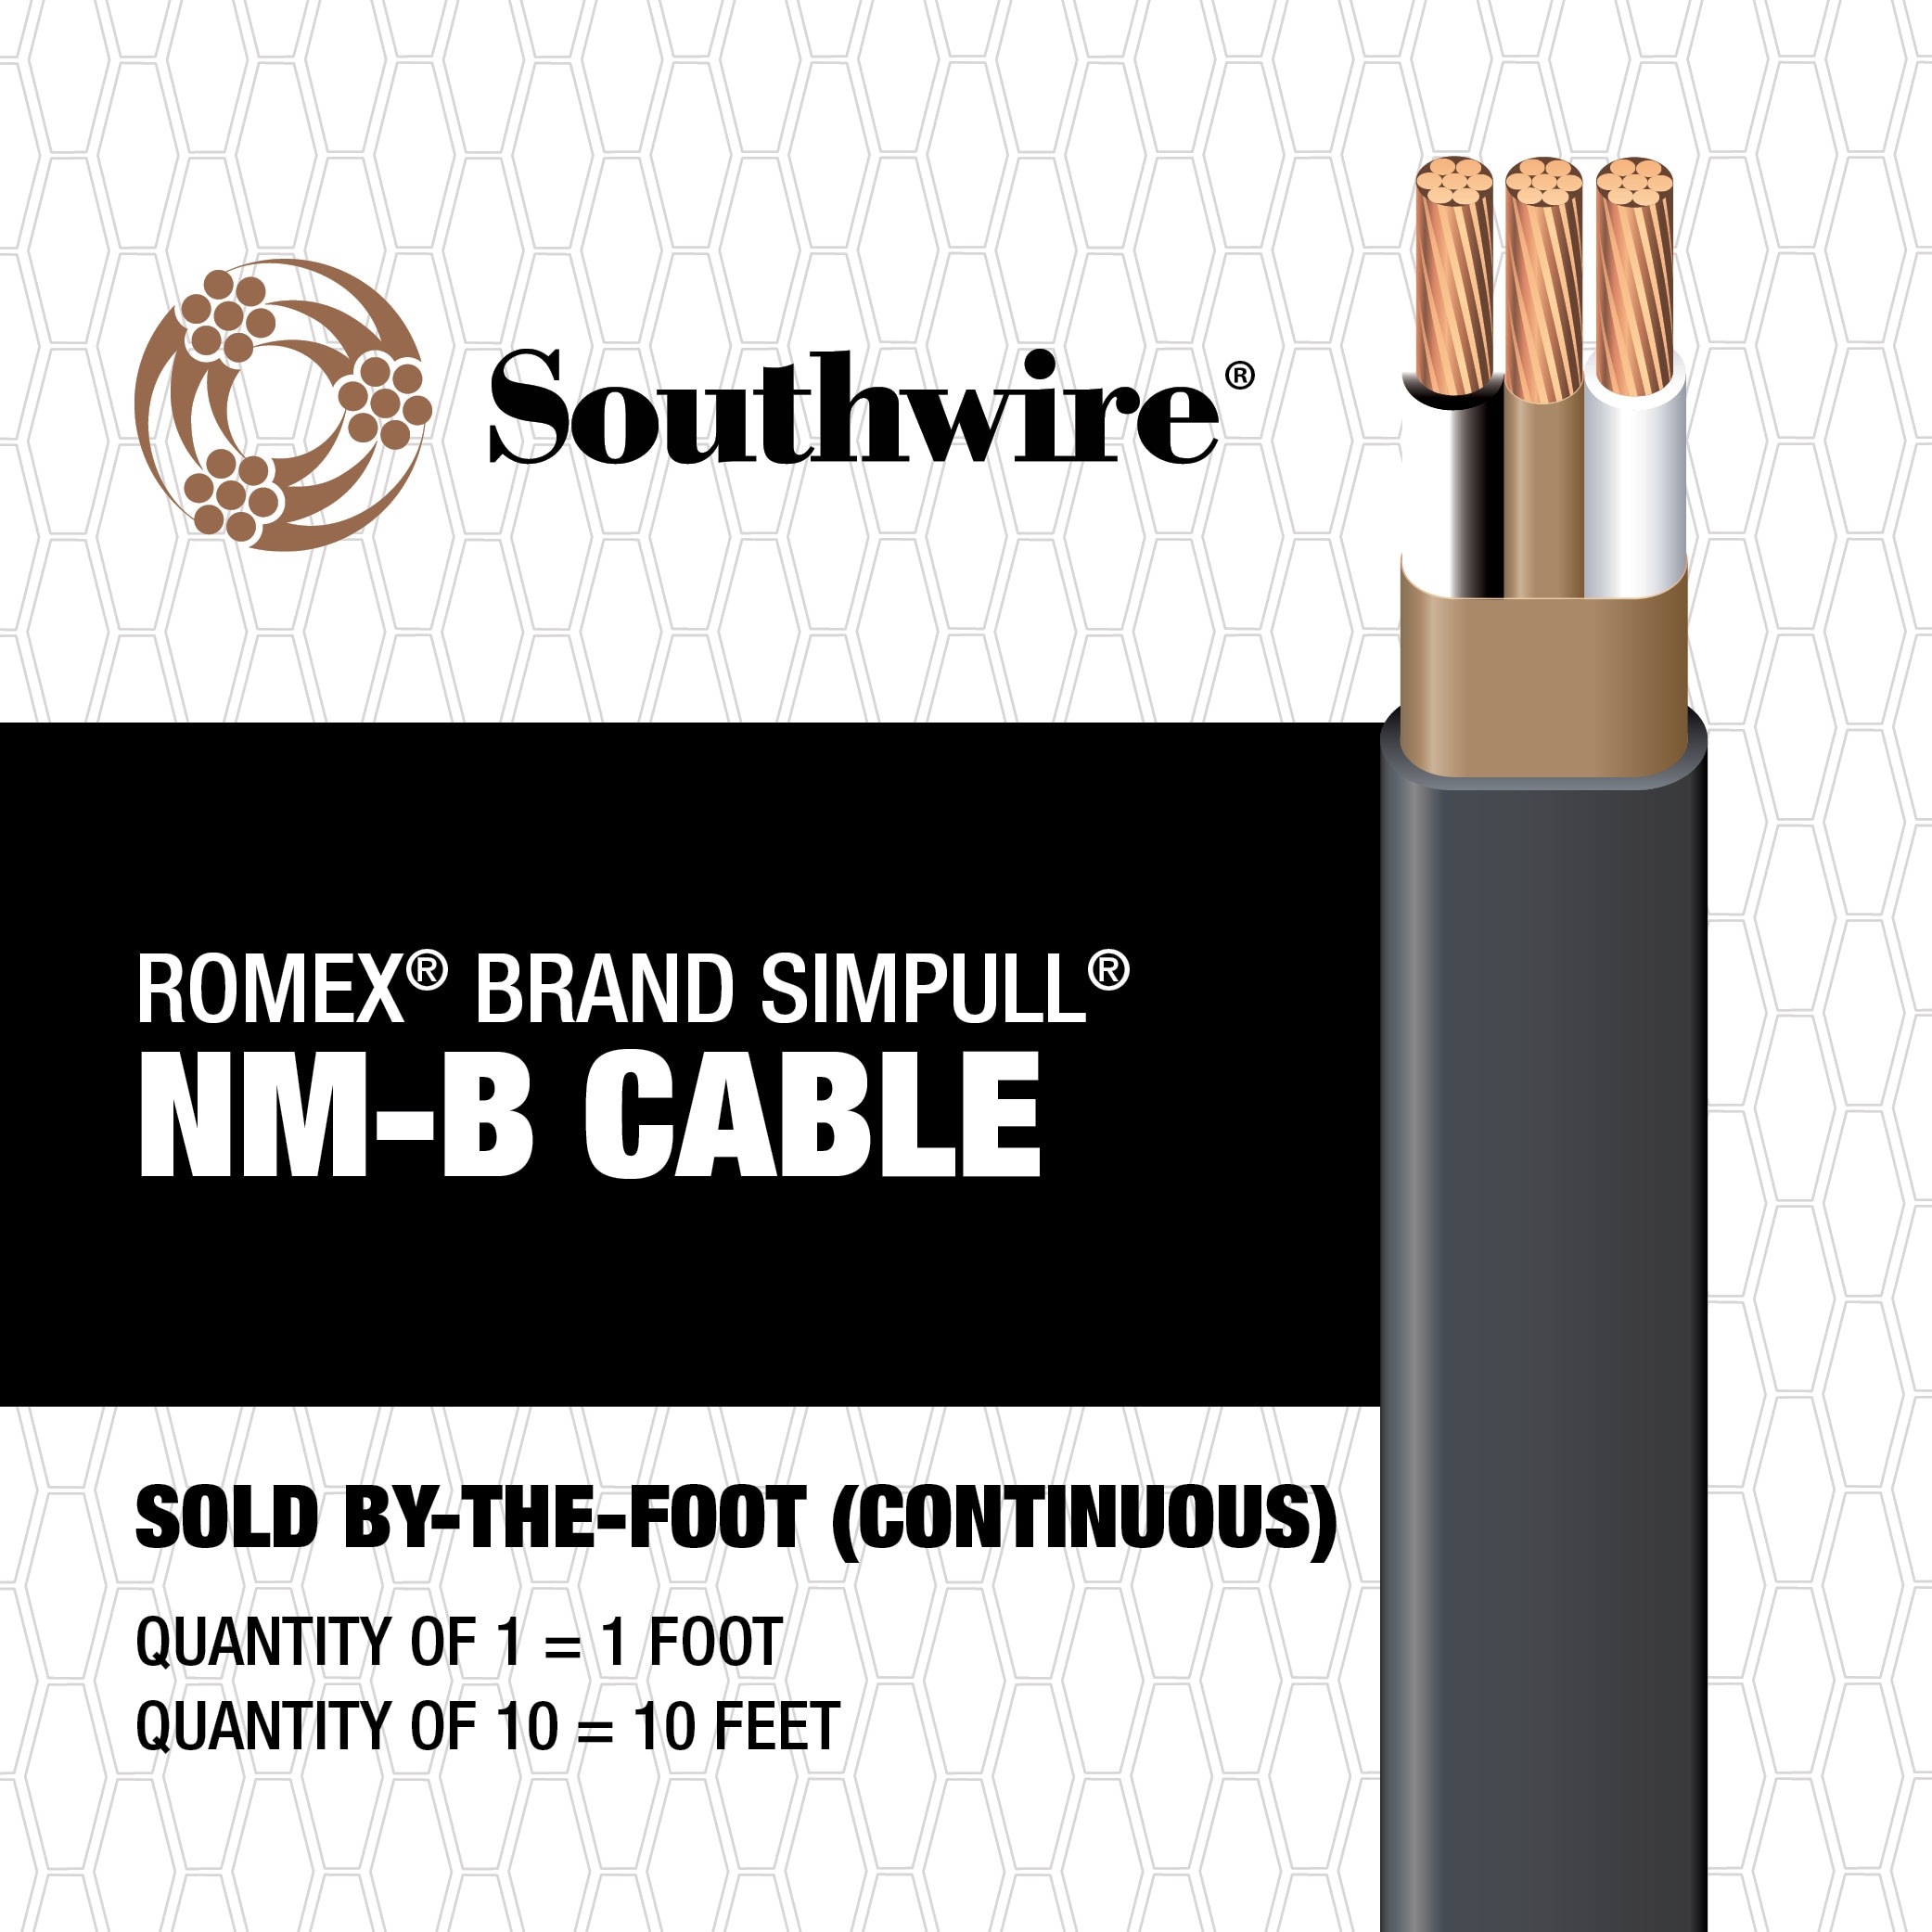 30 ft 6/2 NM-B WG Romex Wire/Cable 